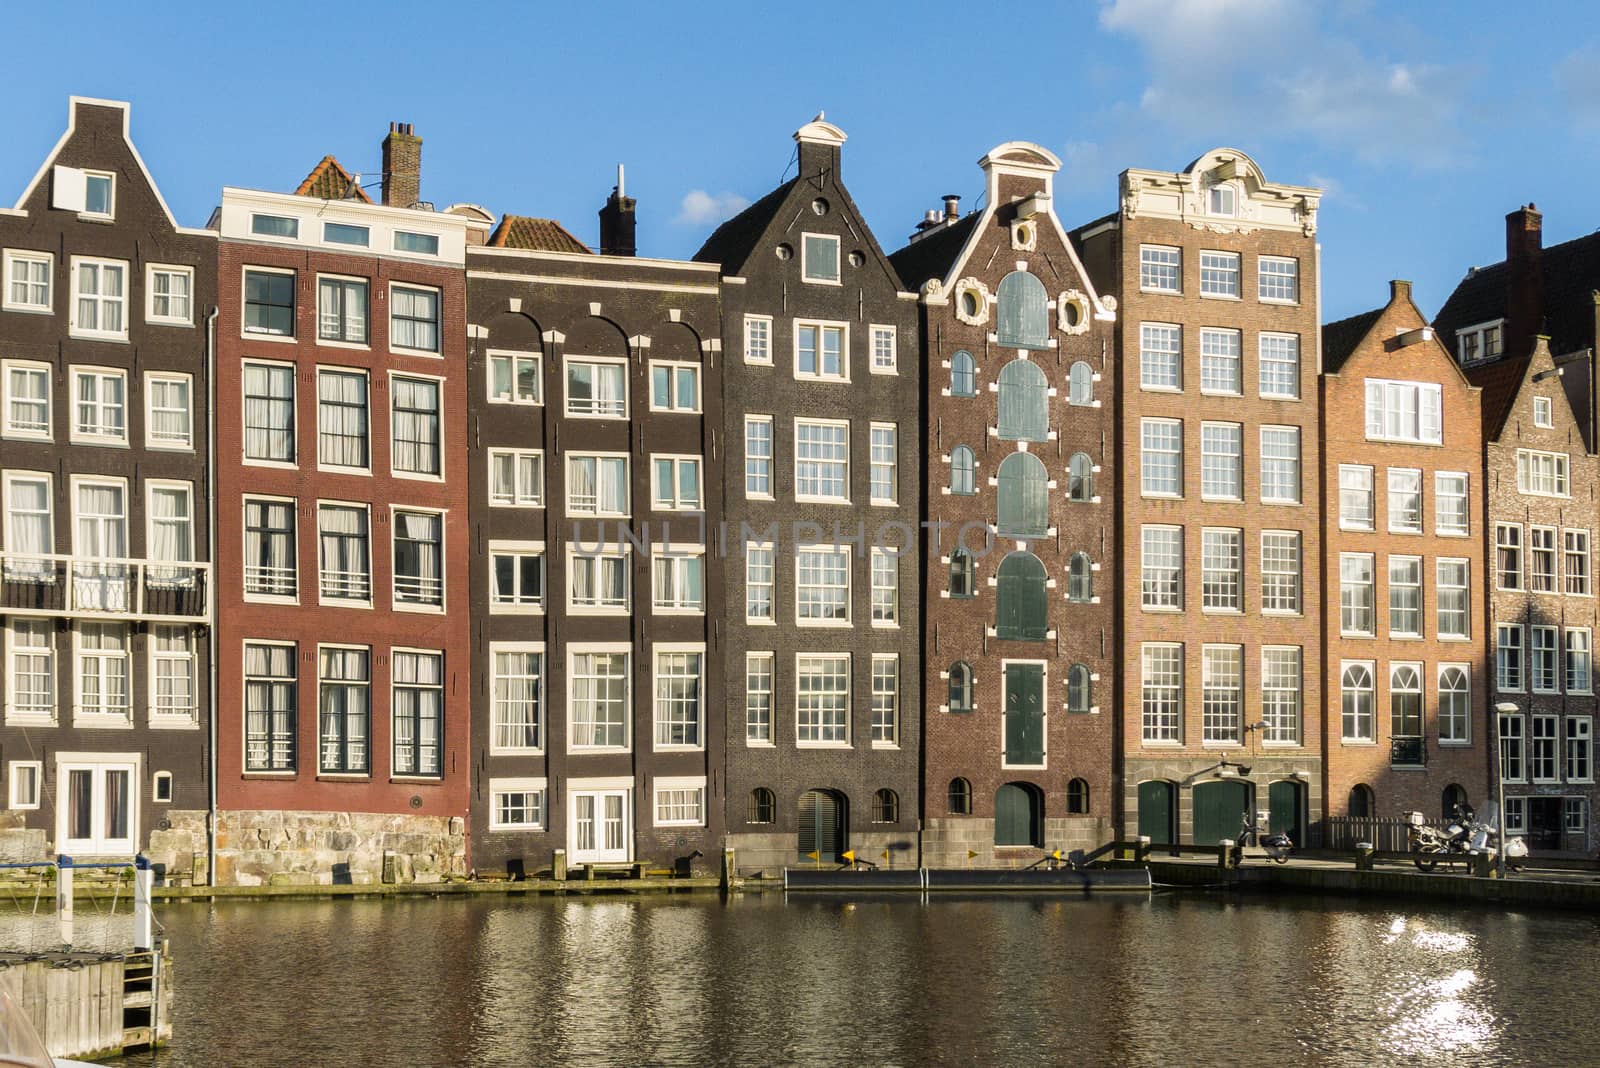 Houses in in a street by a canal in Amsterdam in the Netherlands